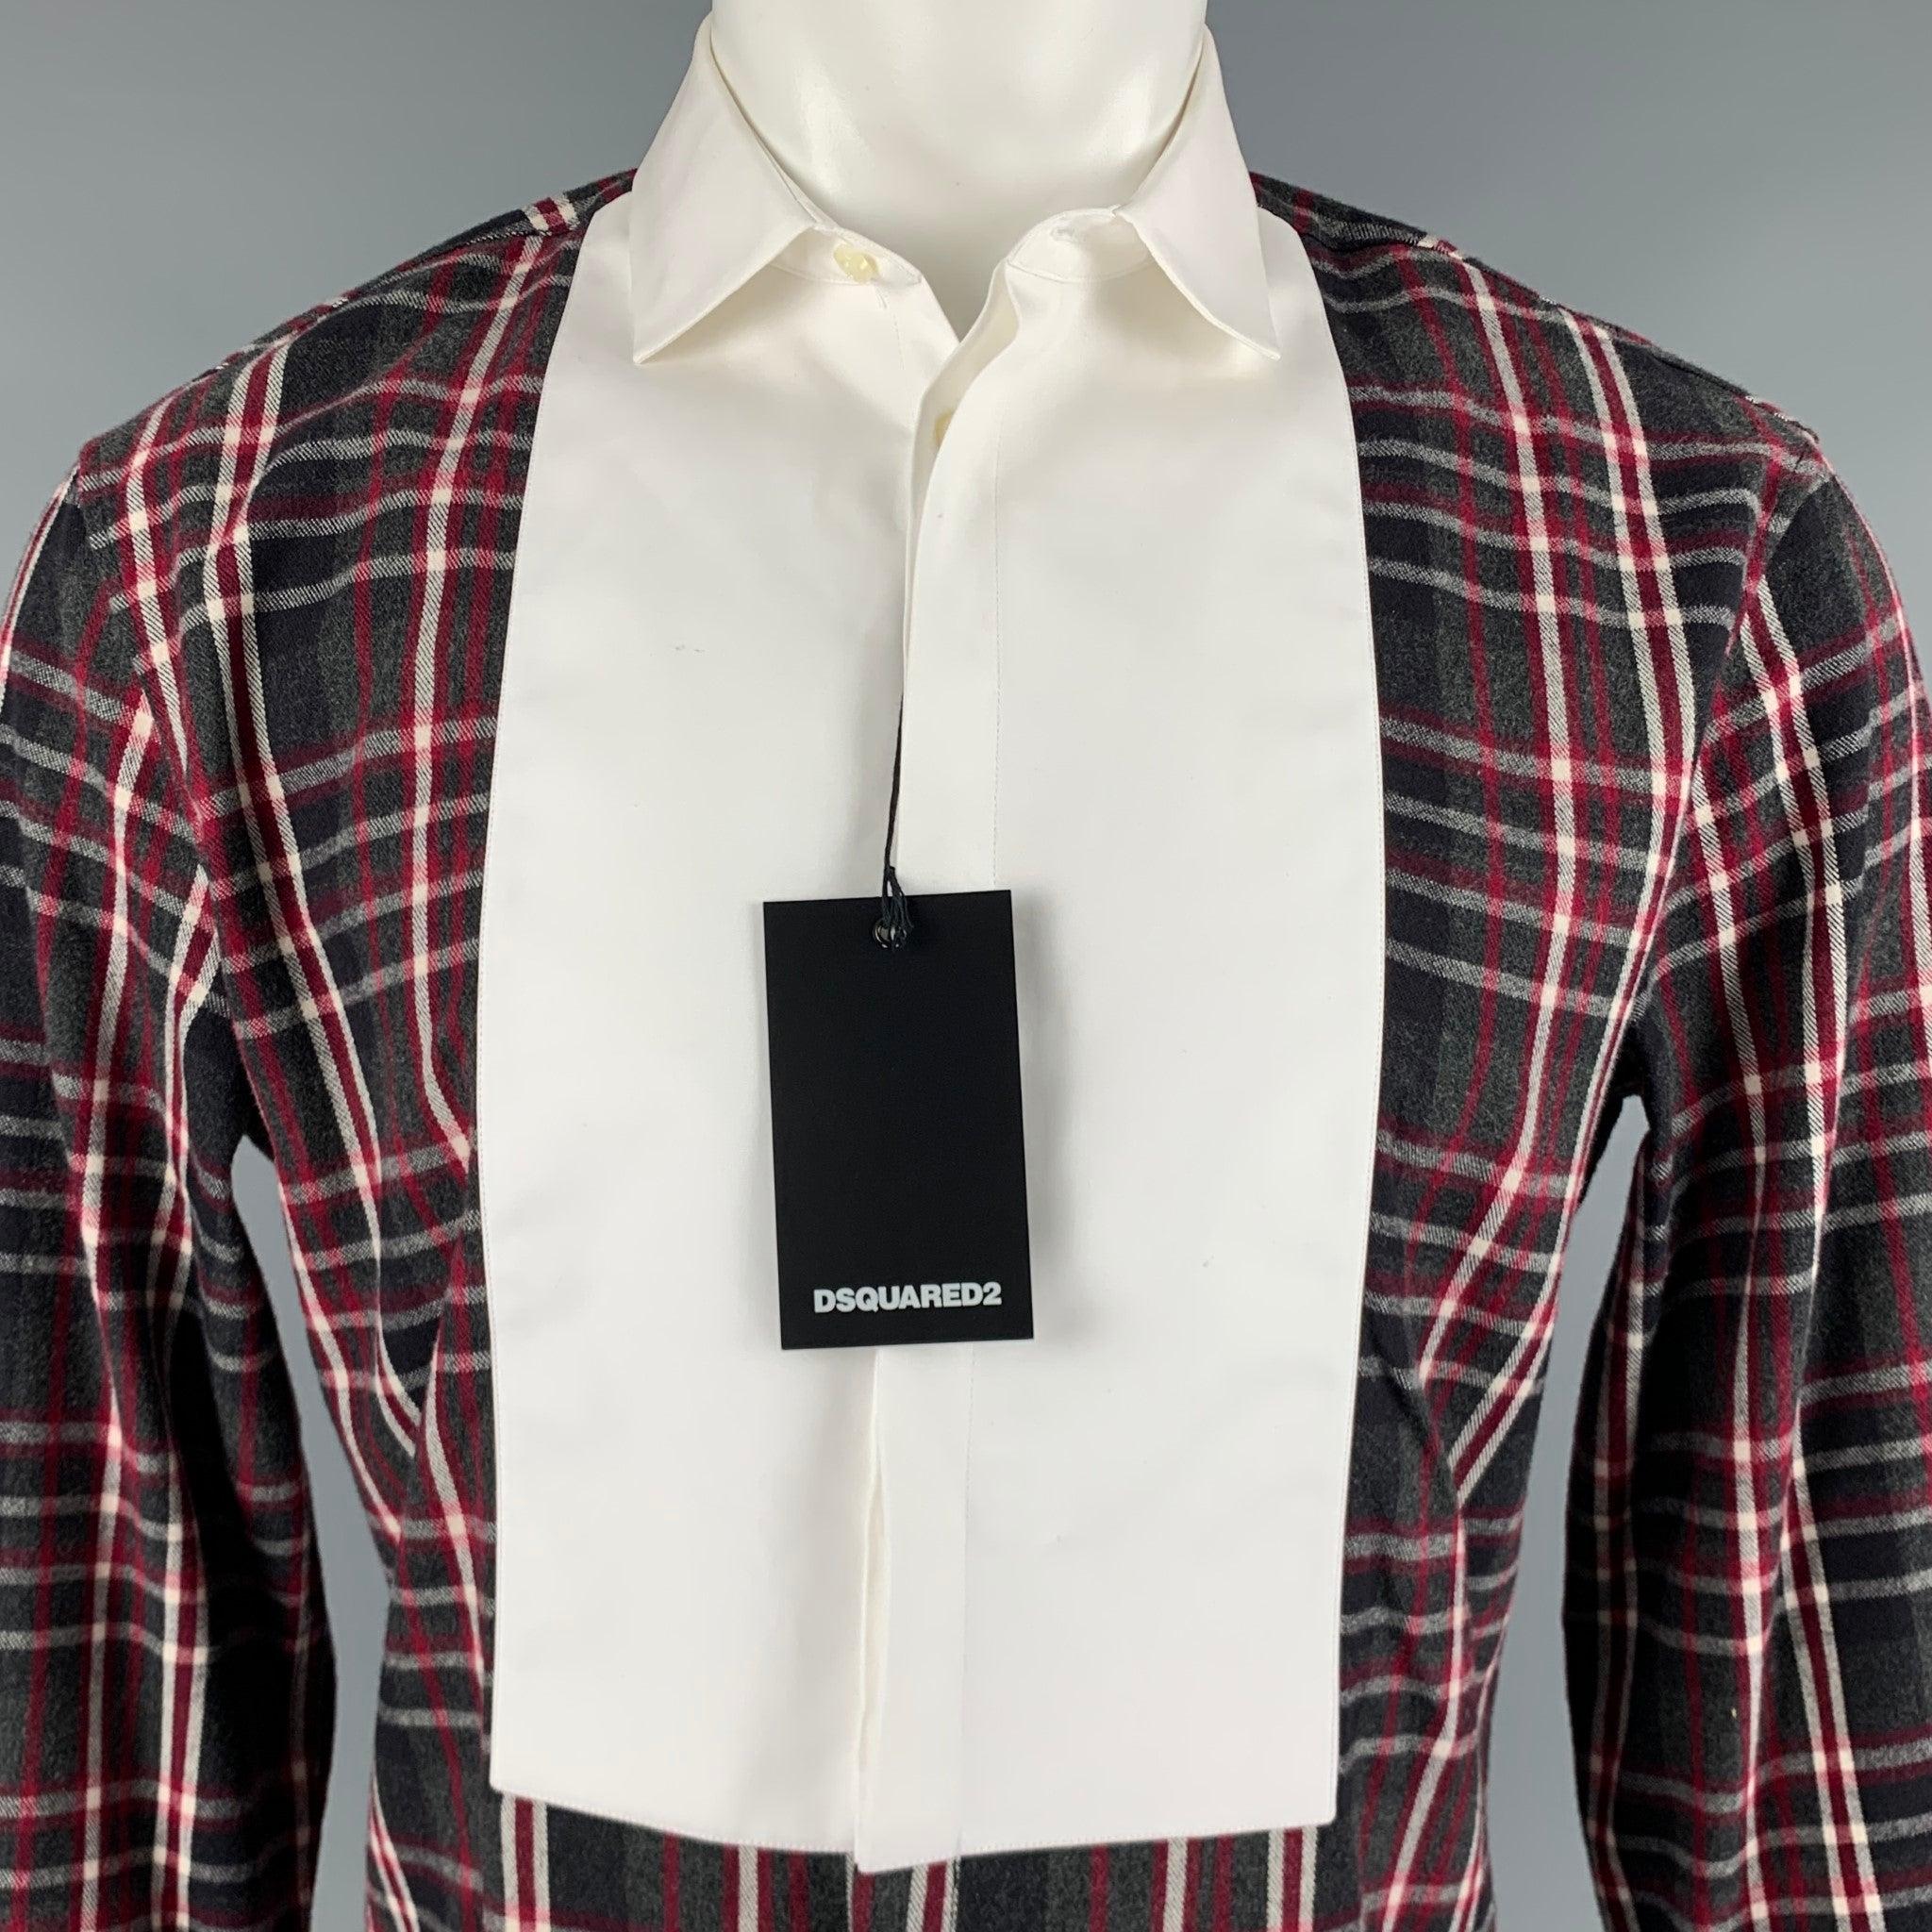 DSQUARED2 long sleeve tuxedo shirt
in a grey cotton featuring black and red plaid, white bib front, cutaway collar, and a hidden button closure. Made in Italy.Very Good Pre-Owned Condition with Tags. Missing one button and minor marks. 

Marked:  